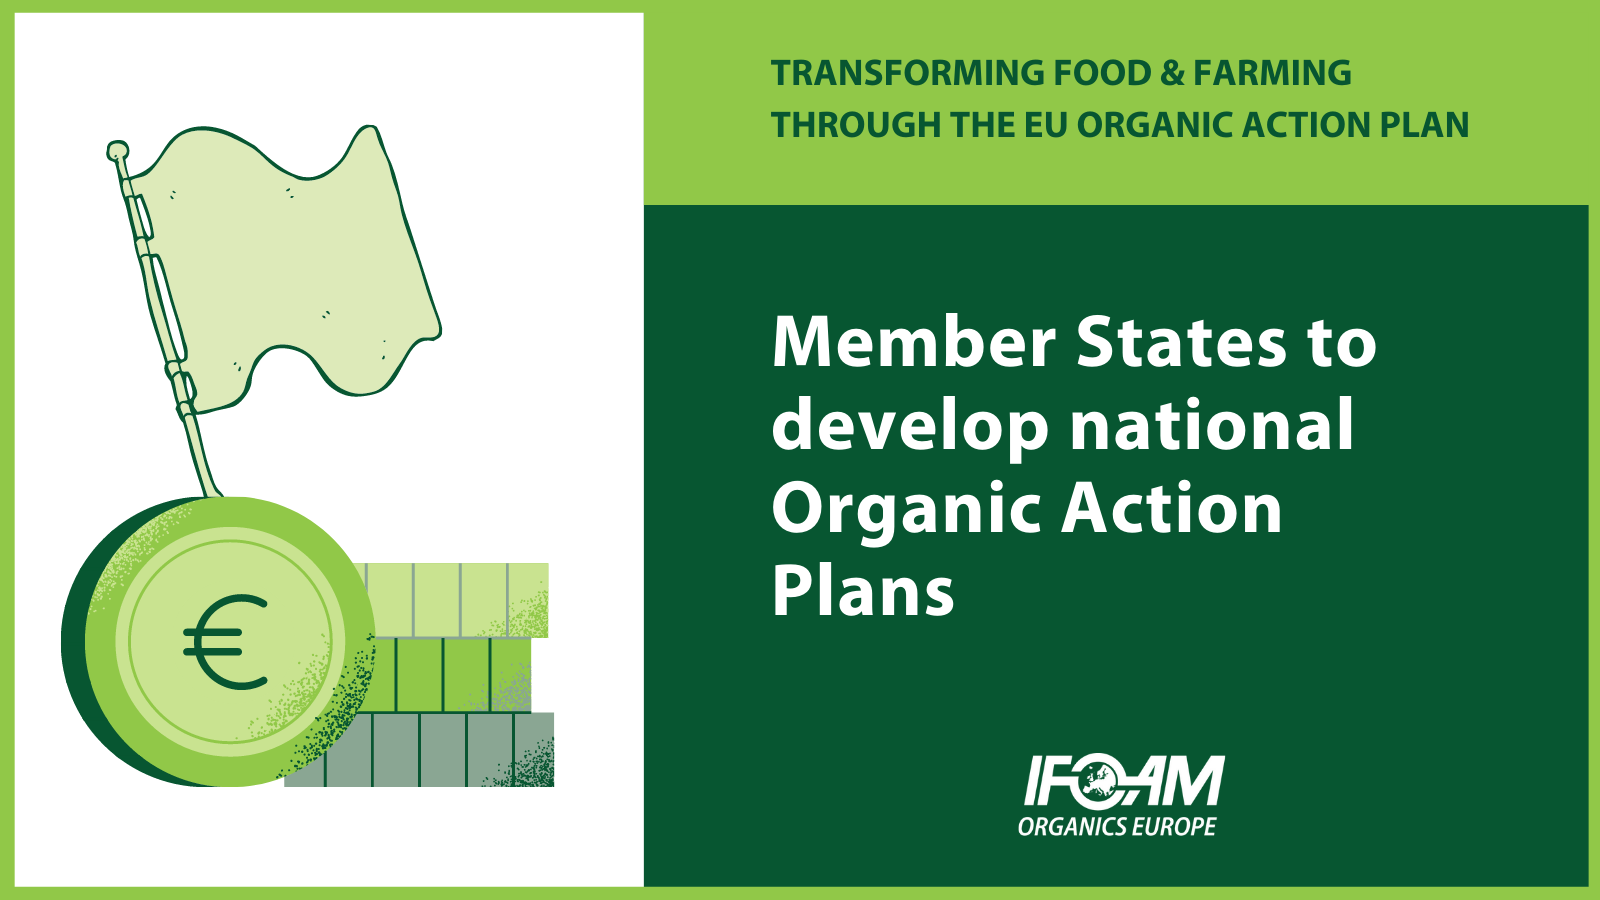 IFOAM Organics Europe's demans for the new Organic Action Plan - National Organic Action Plans